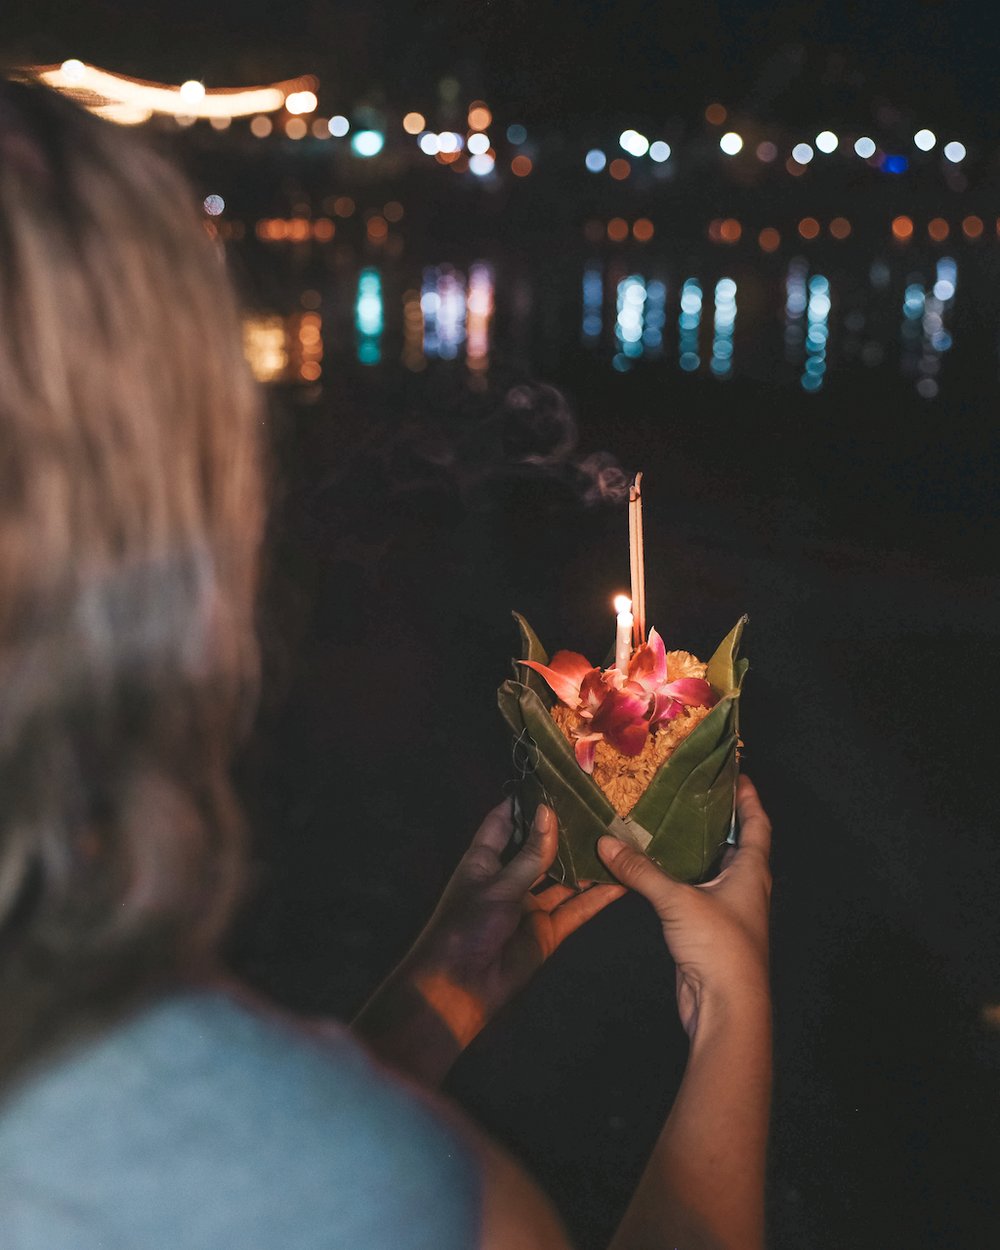 Releasing my krathong on the river during Loy Krathong 2022 - Chiang Mai - Northern Thailand